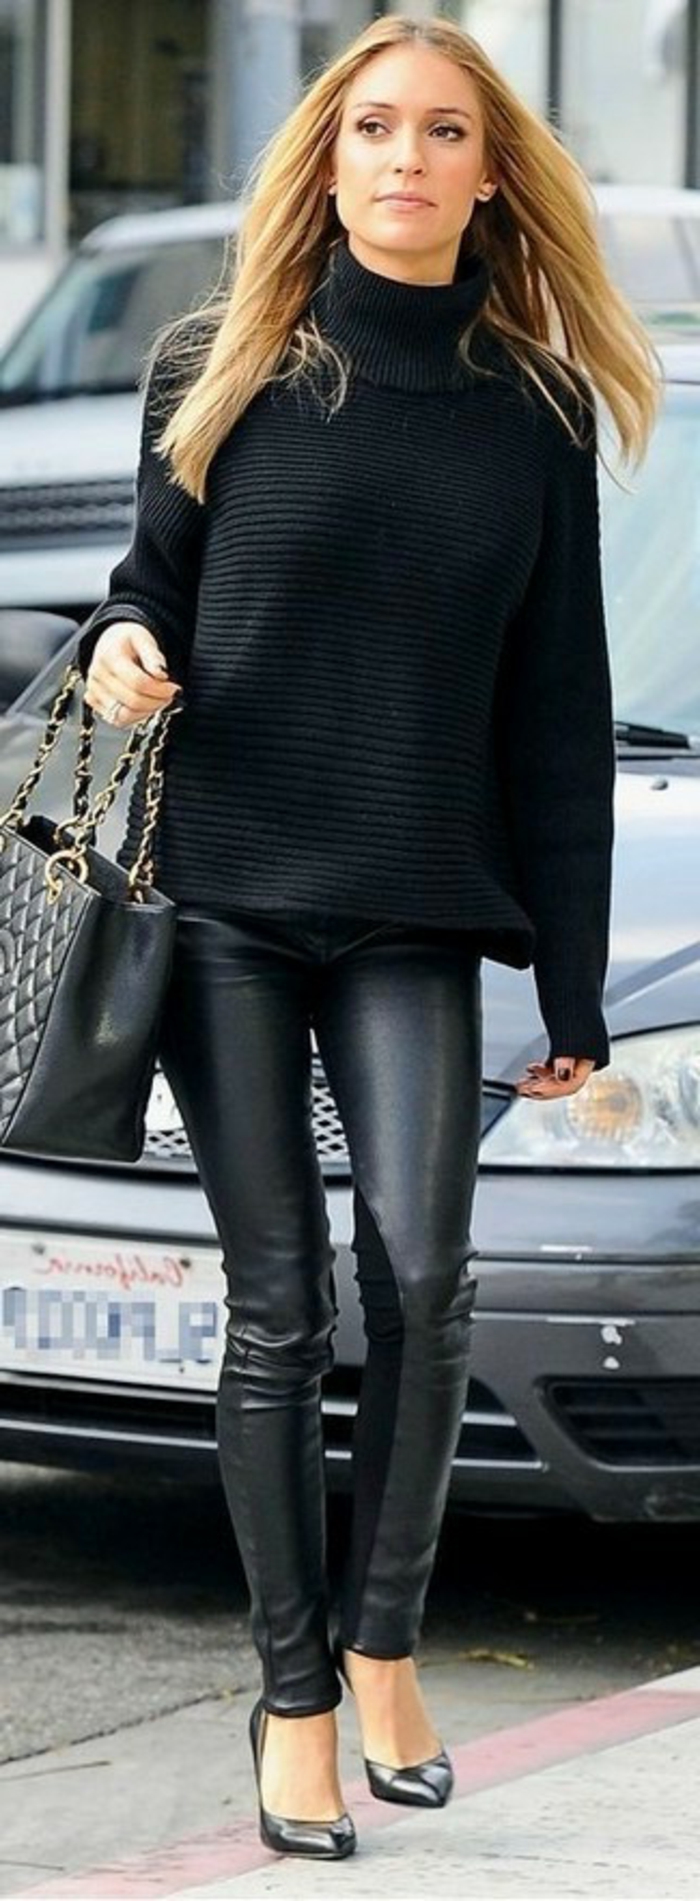 women's business attire, woman wearing black chunky turtleneck sweater, black leather skinny trousers and black high-heels, holding black leather bag